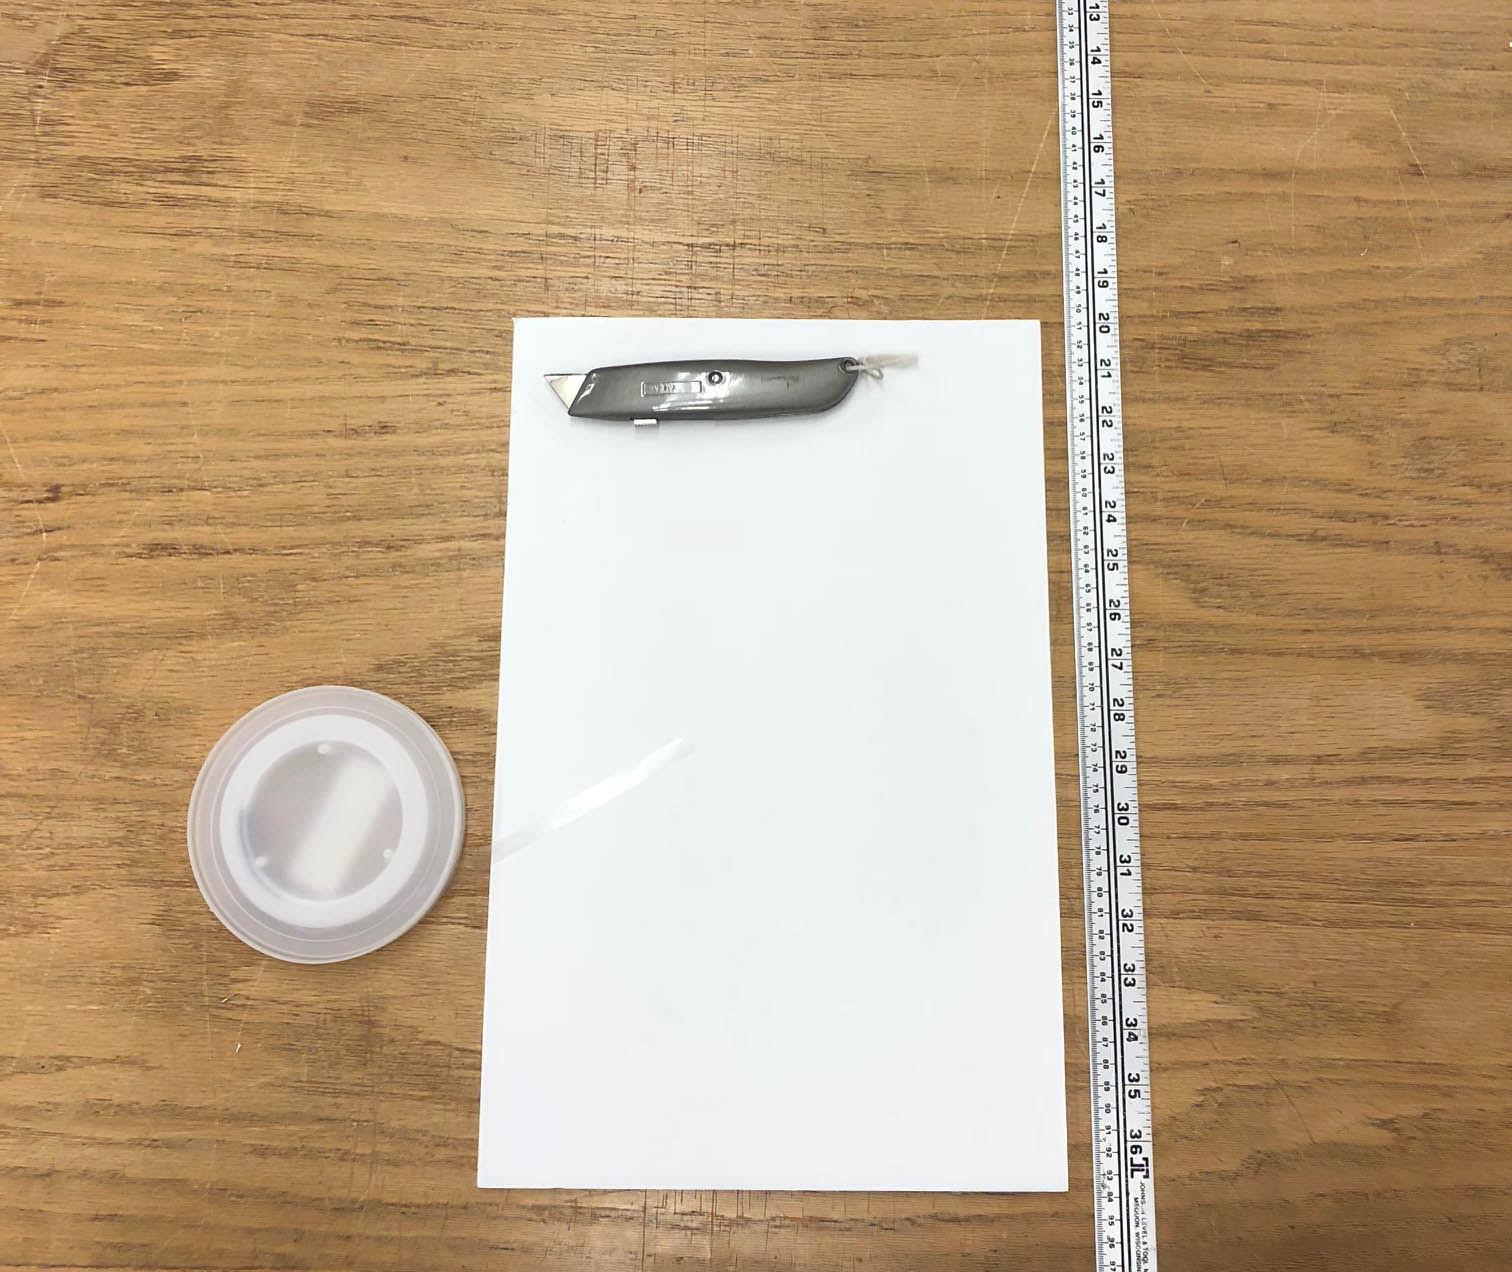 A roll of polyethylene book strapping, a piece of foam core, a utility knife, and a ruler on a table.